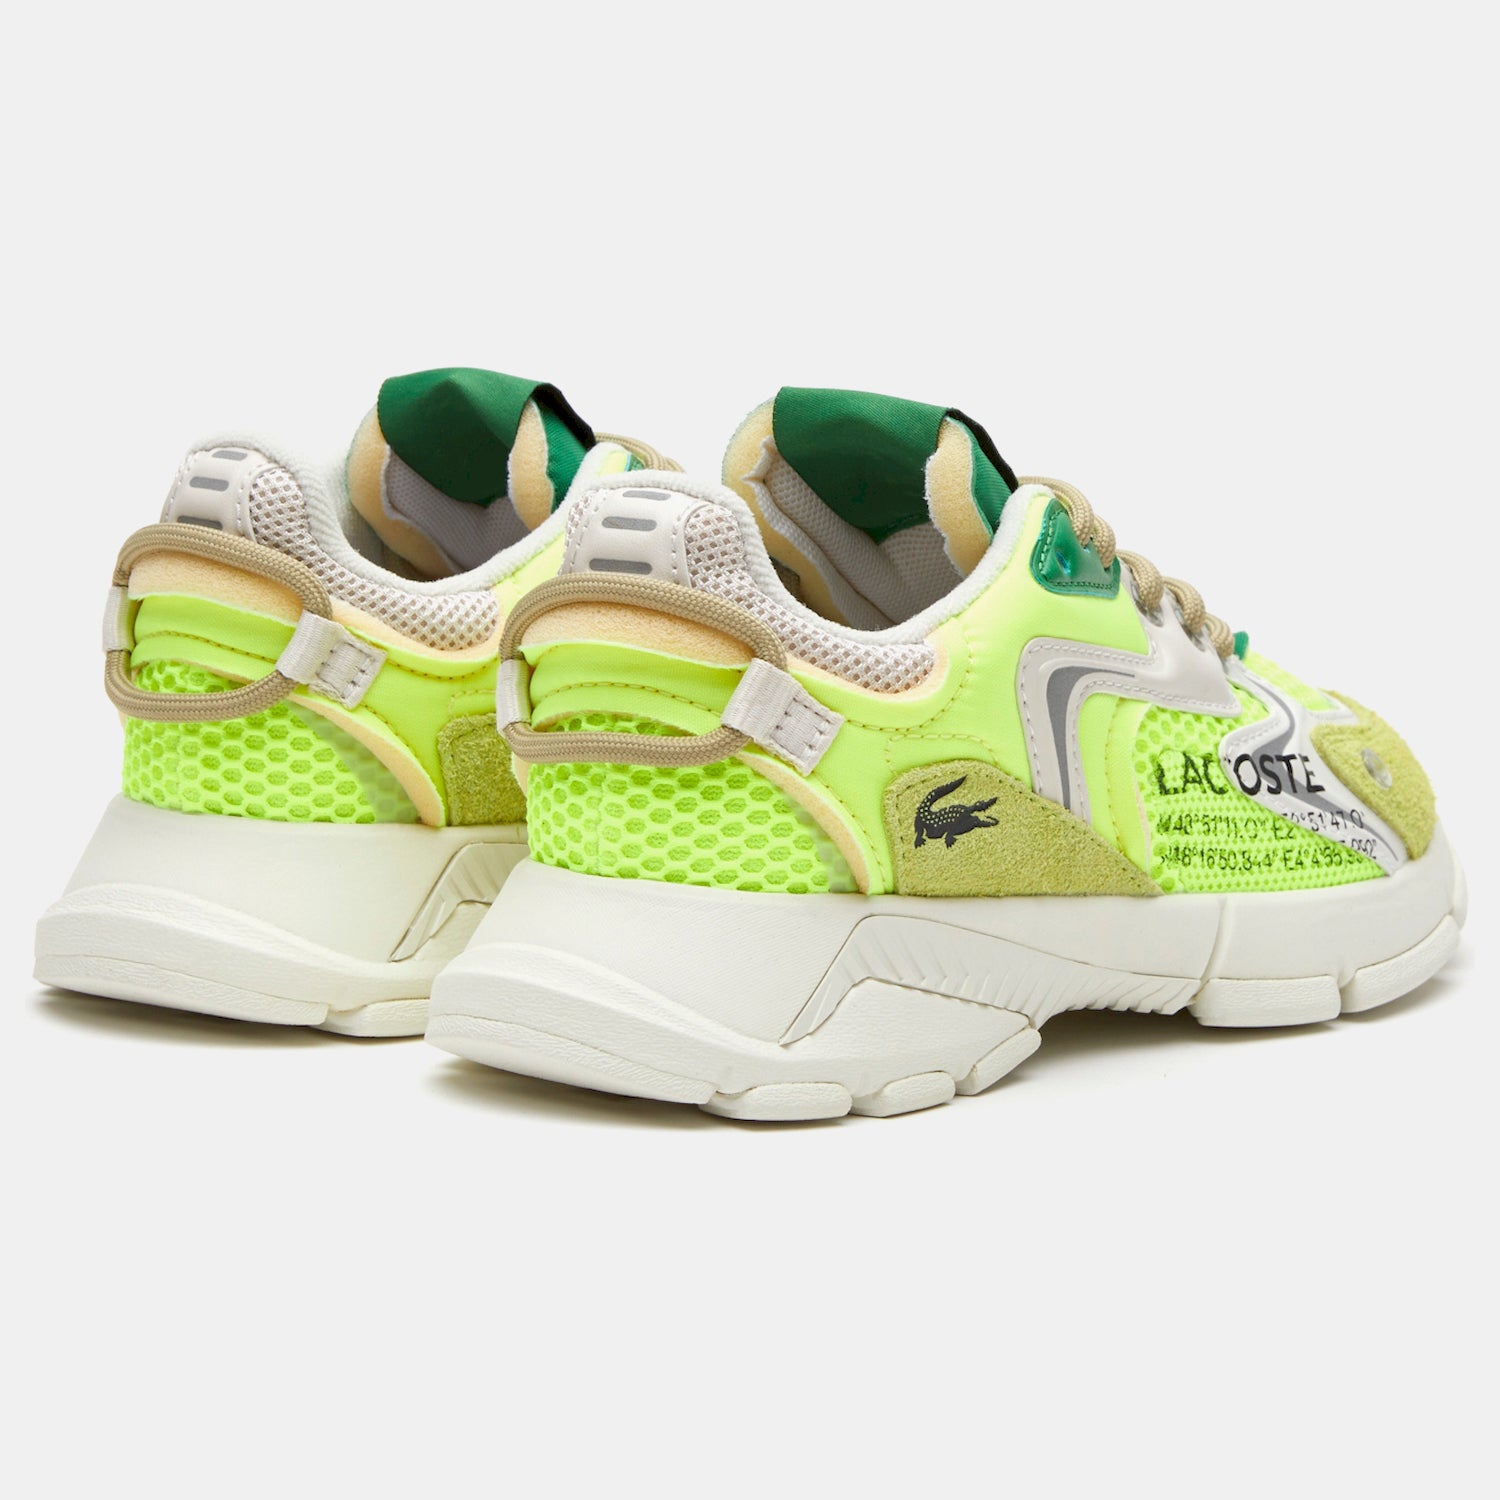 Lacoste Sapatilhas Sneakers Shoes L003 Yellow Whi Amarelo Branco_shot3